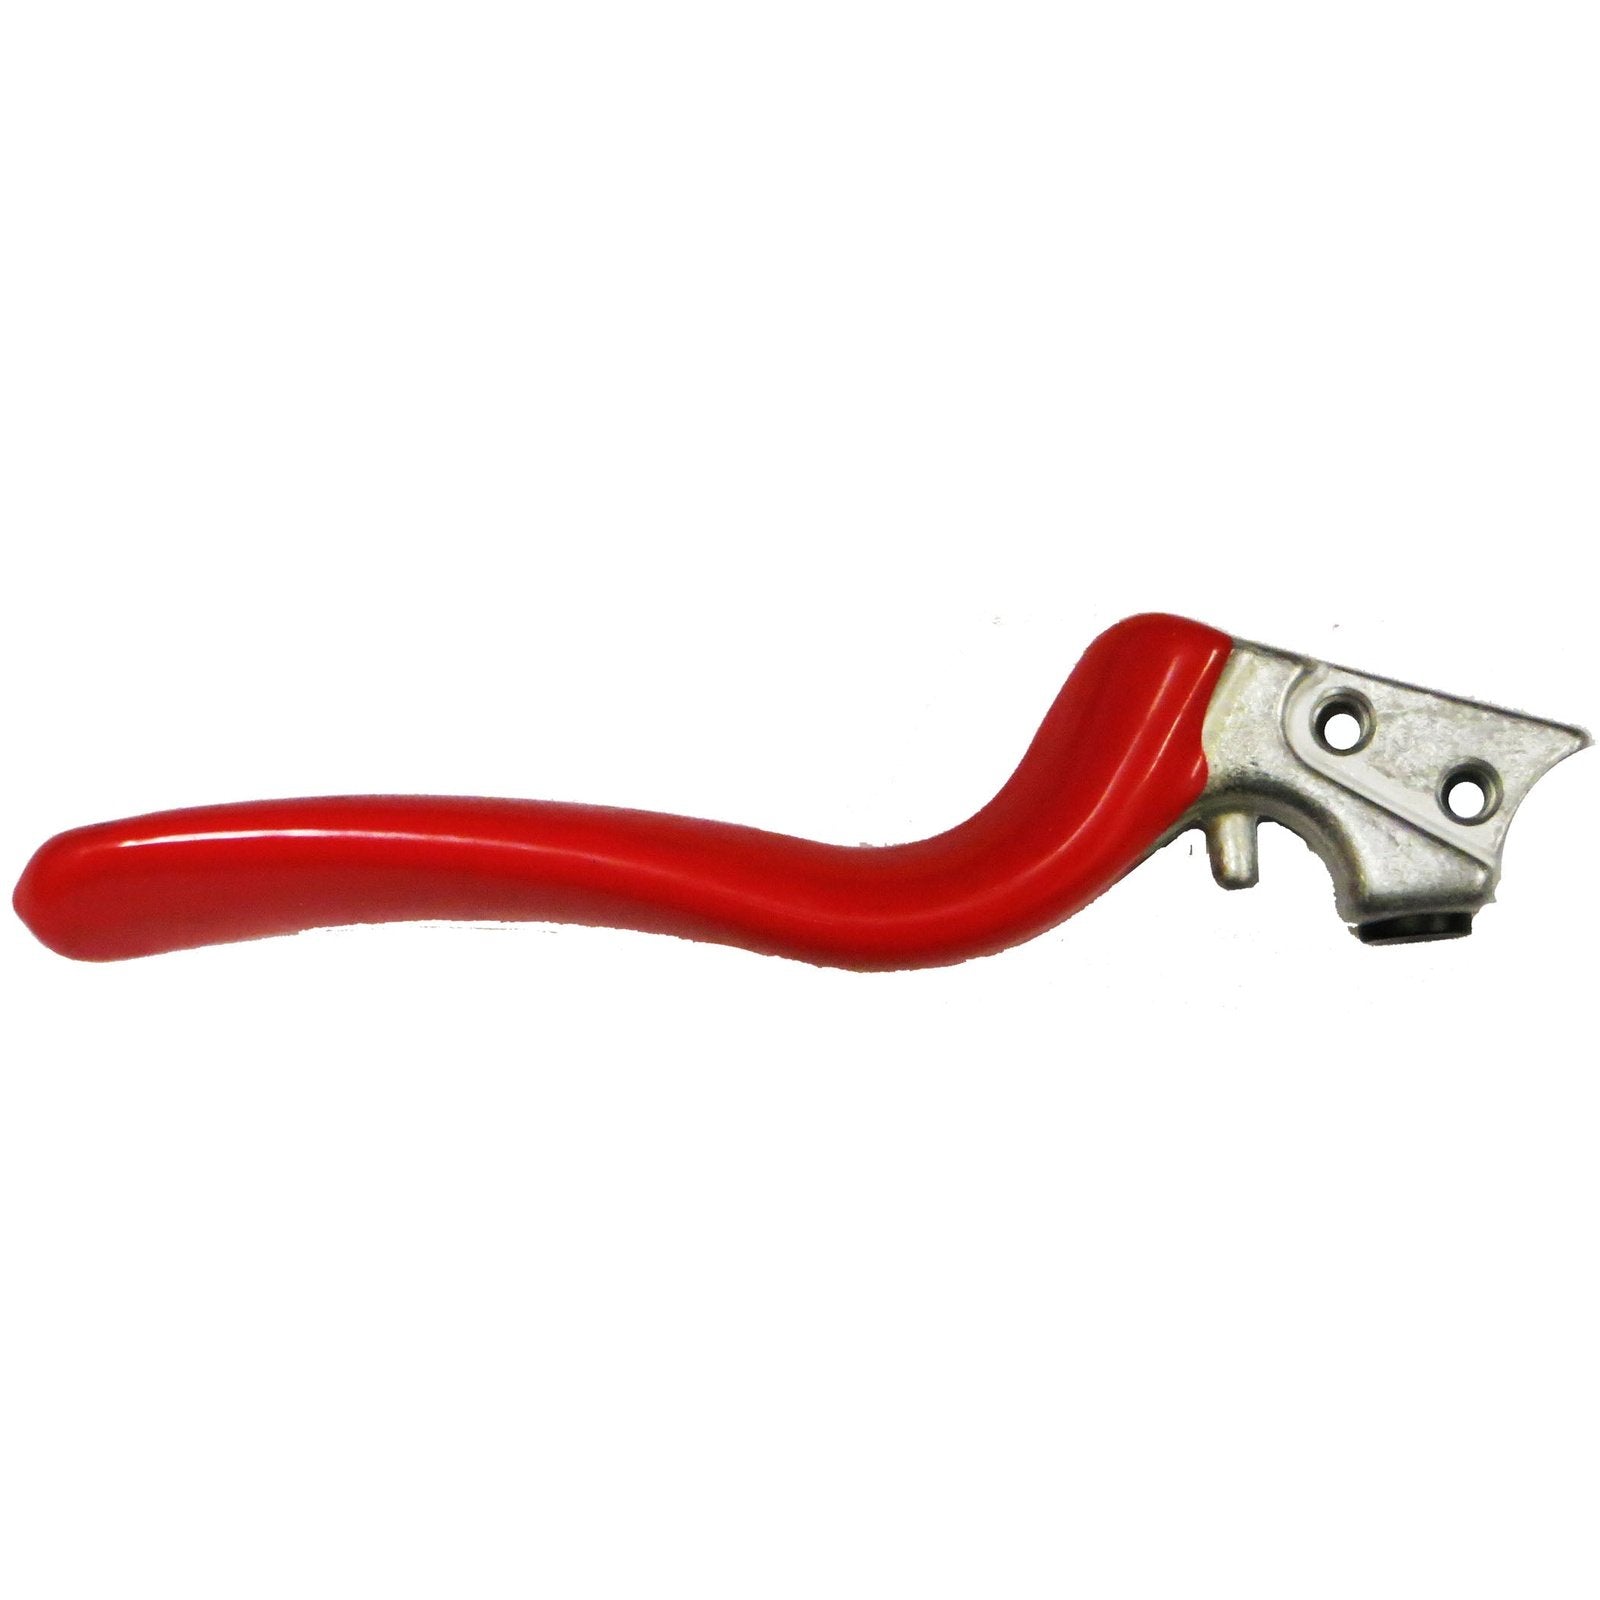 Felco 9/2 Replacement Handle Without Anvil Blade